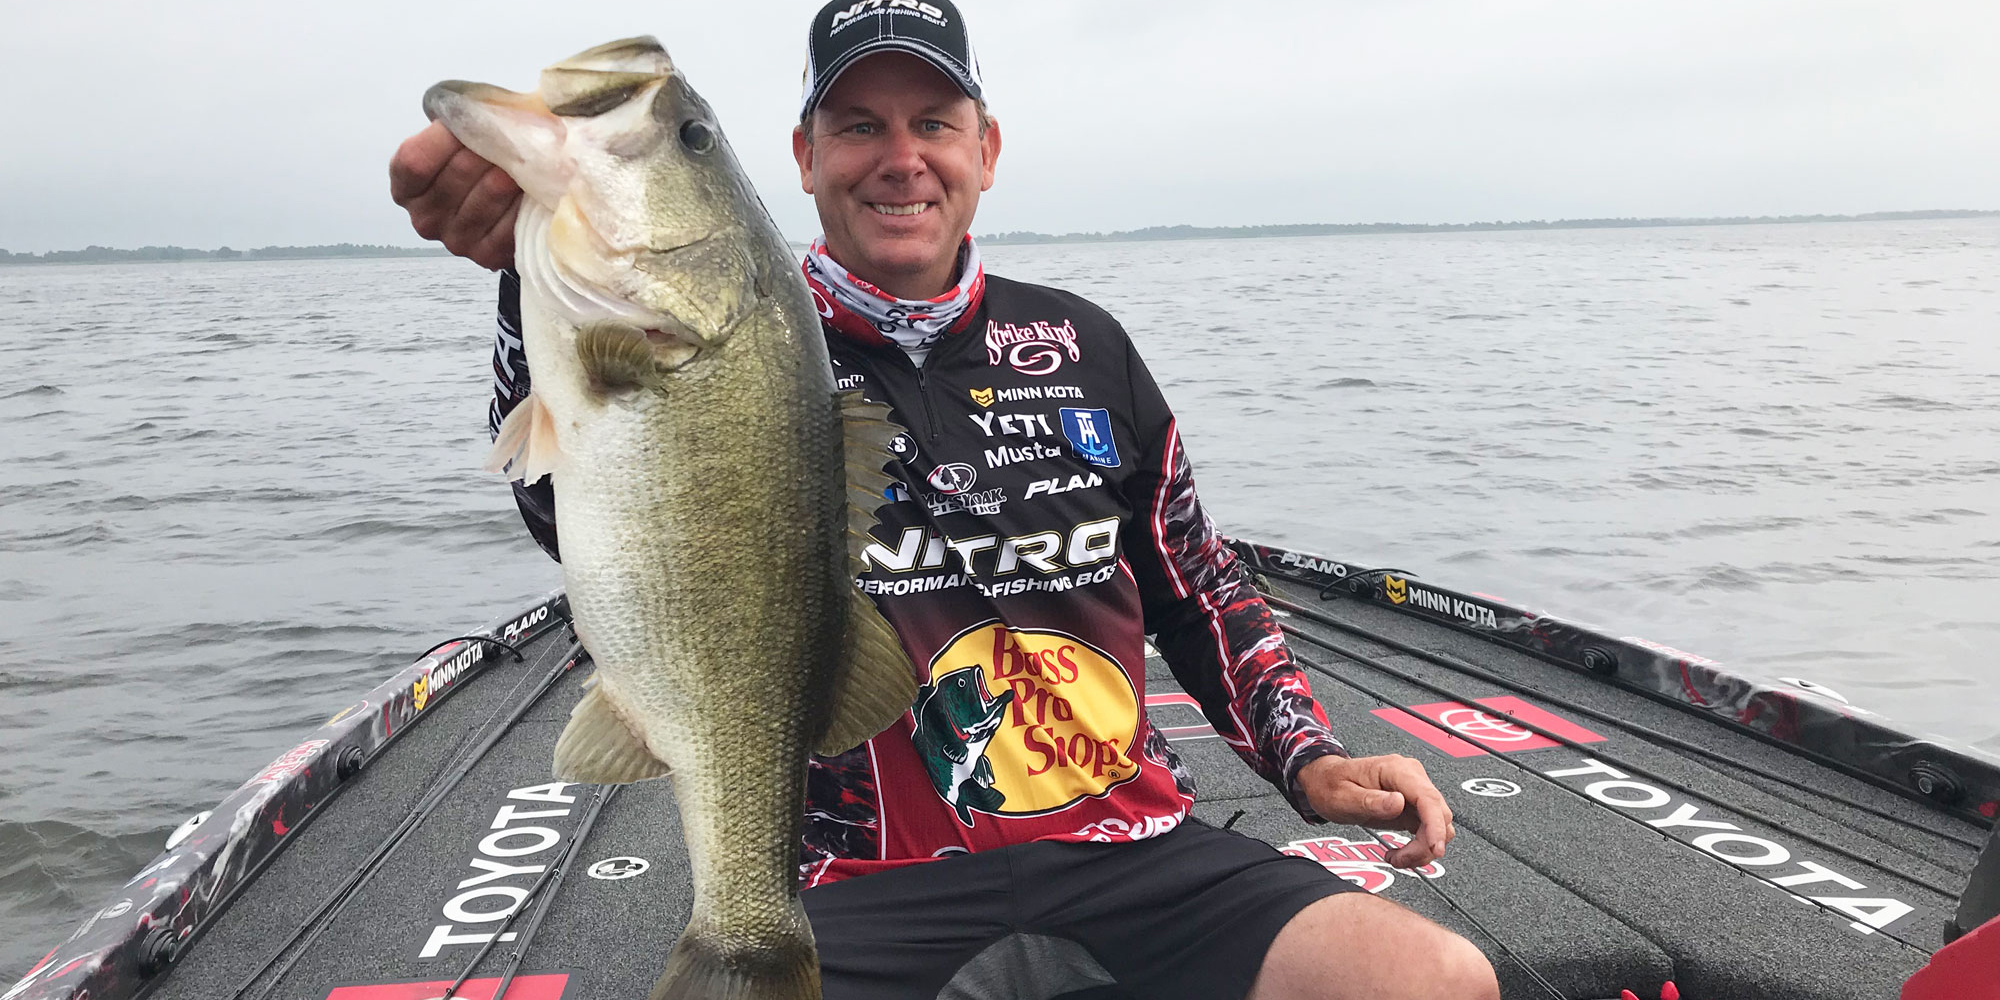 KEVIN VANDAM: Ready for a return to Florida sunshine and big five